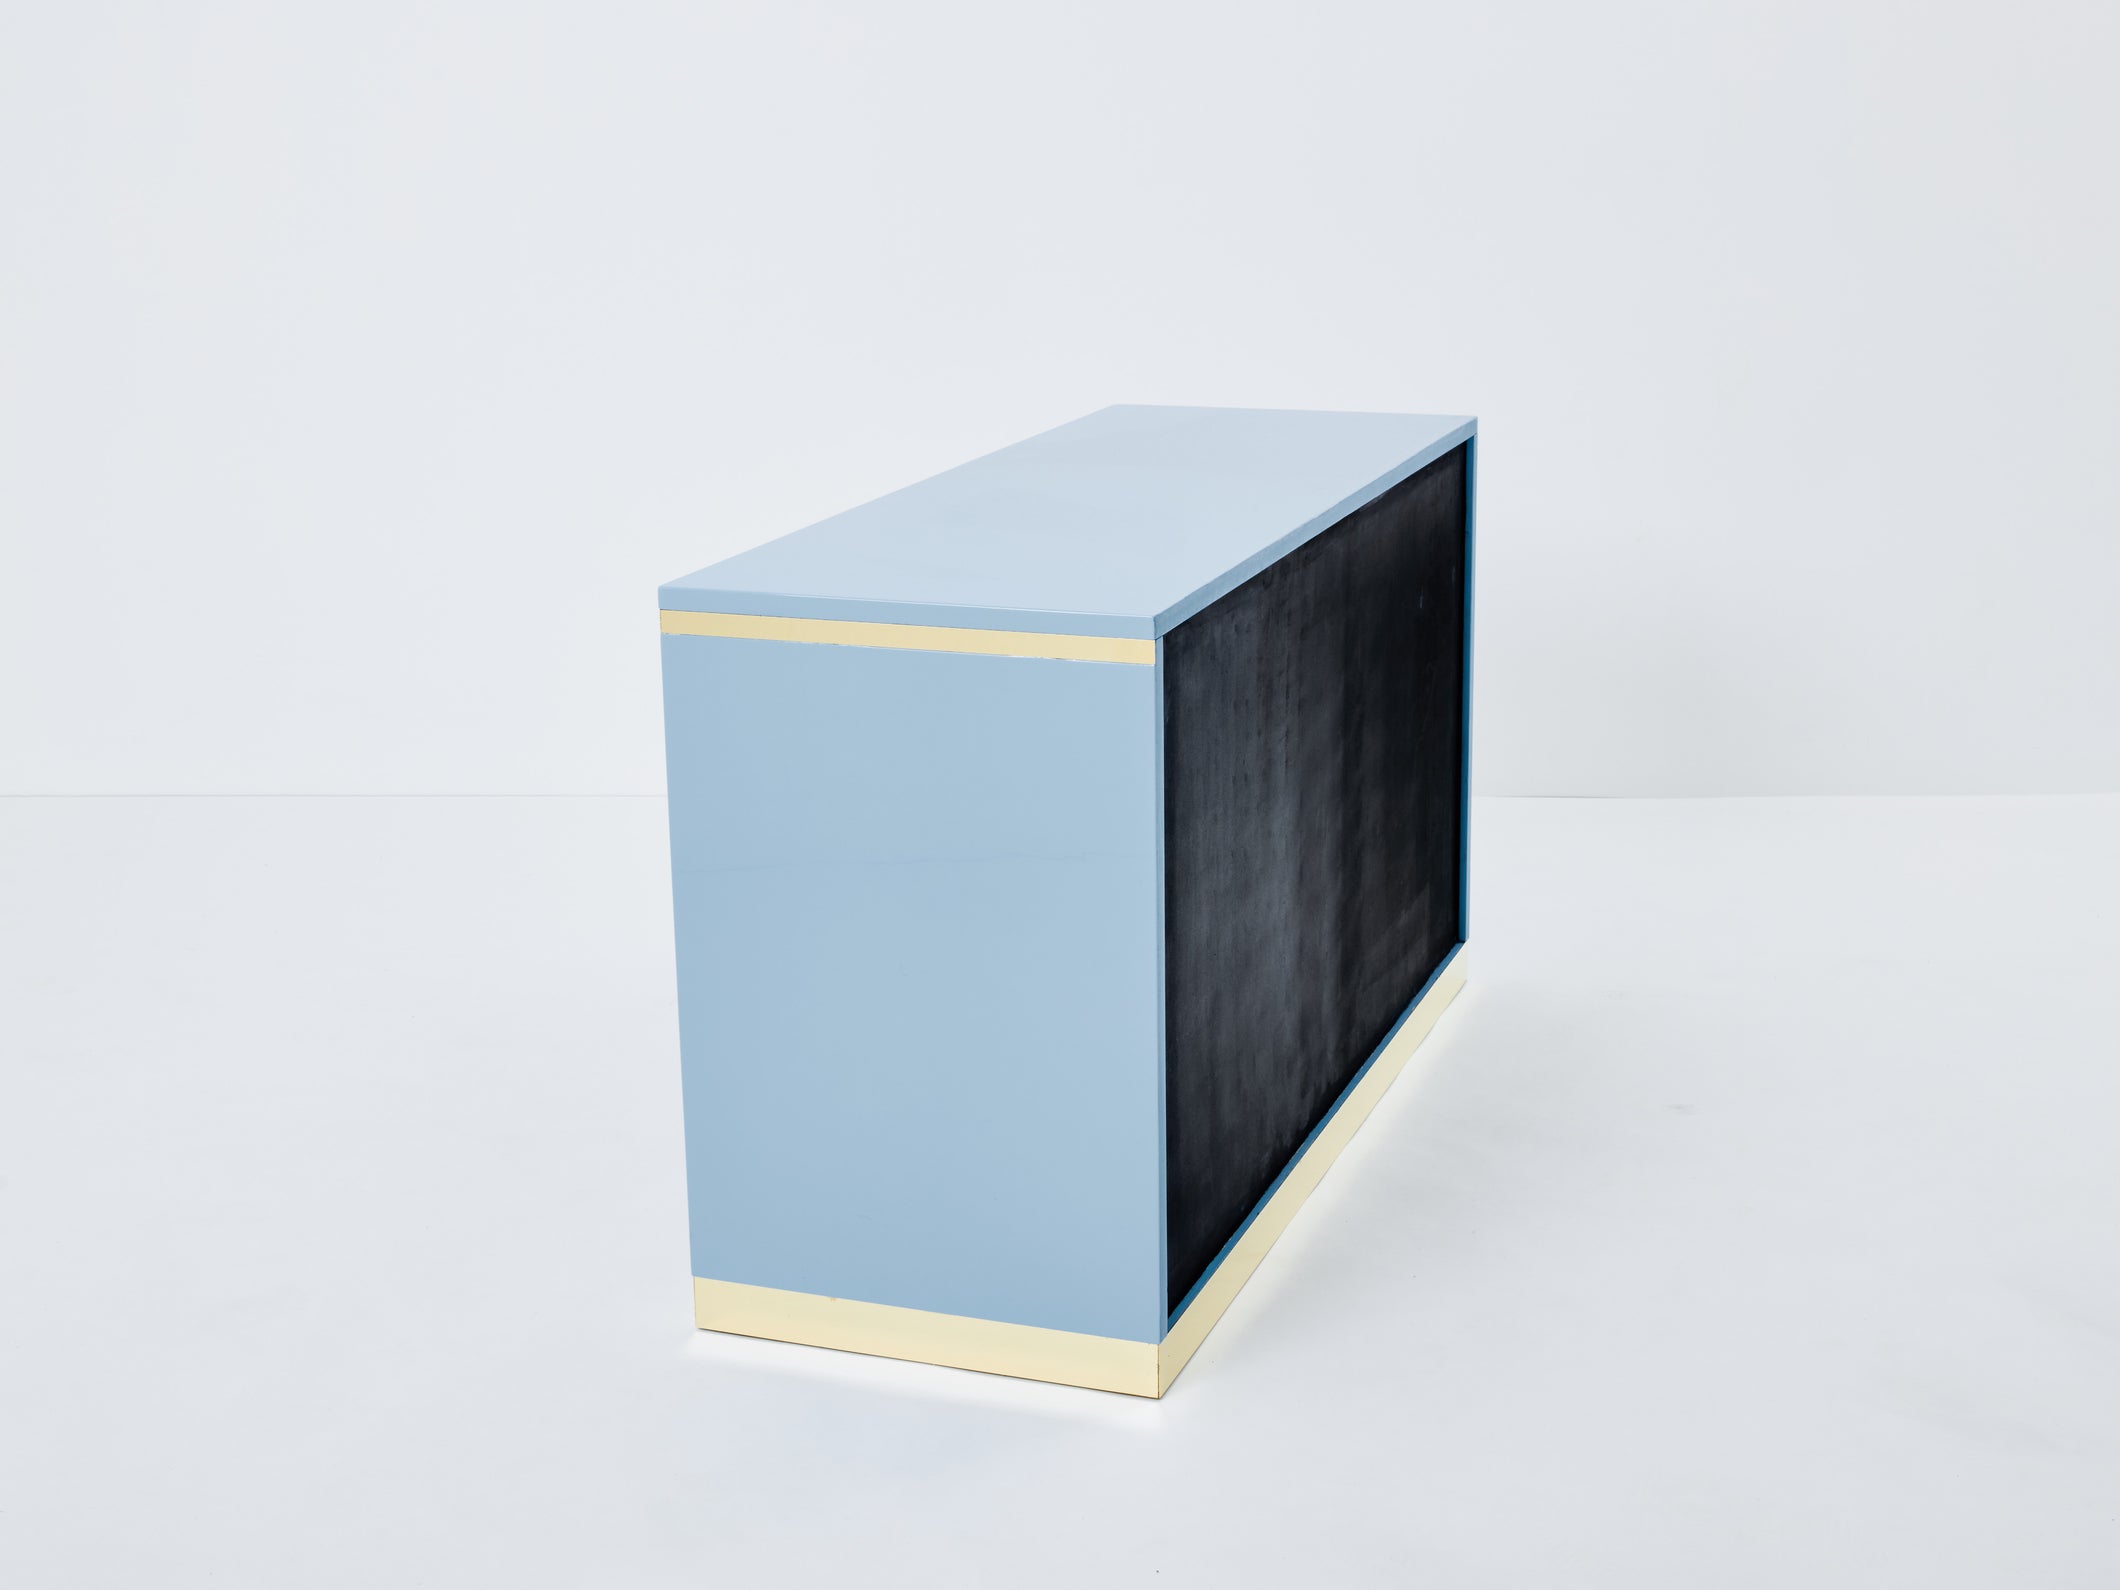 Willy Rizzo light blue lacquered and brass commode 1970s